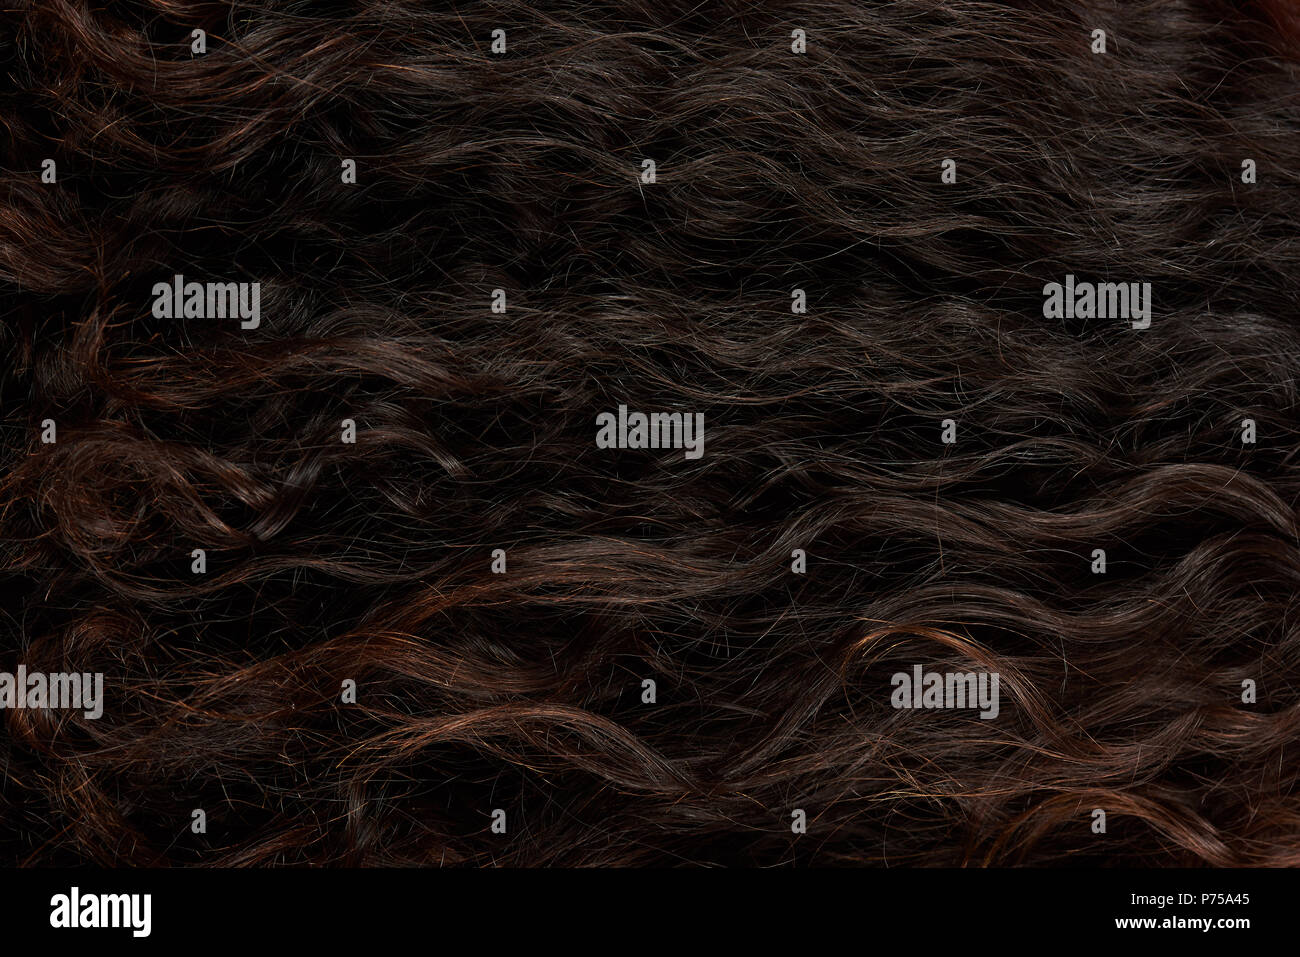 Texture of dark woman wavy curly hair close up view Stock Photo